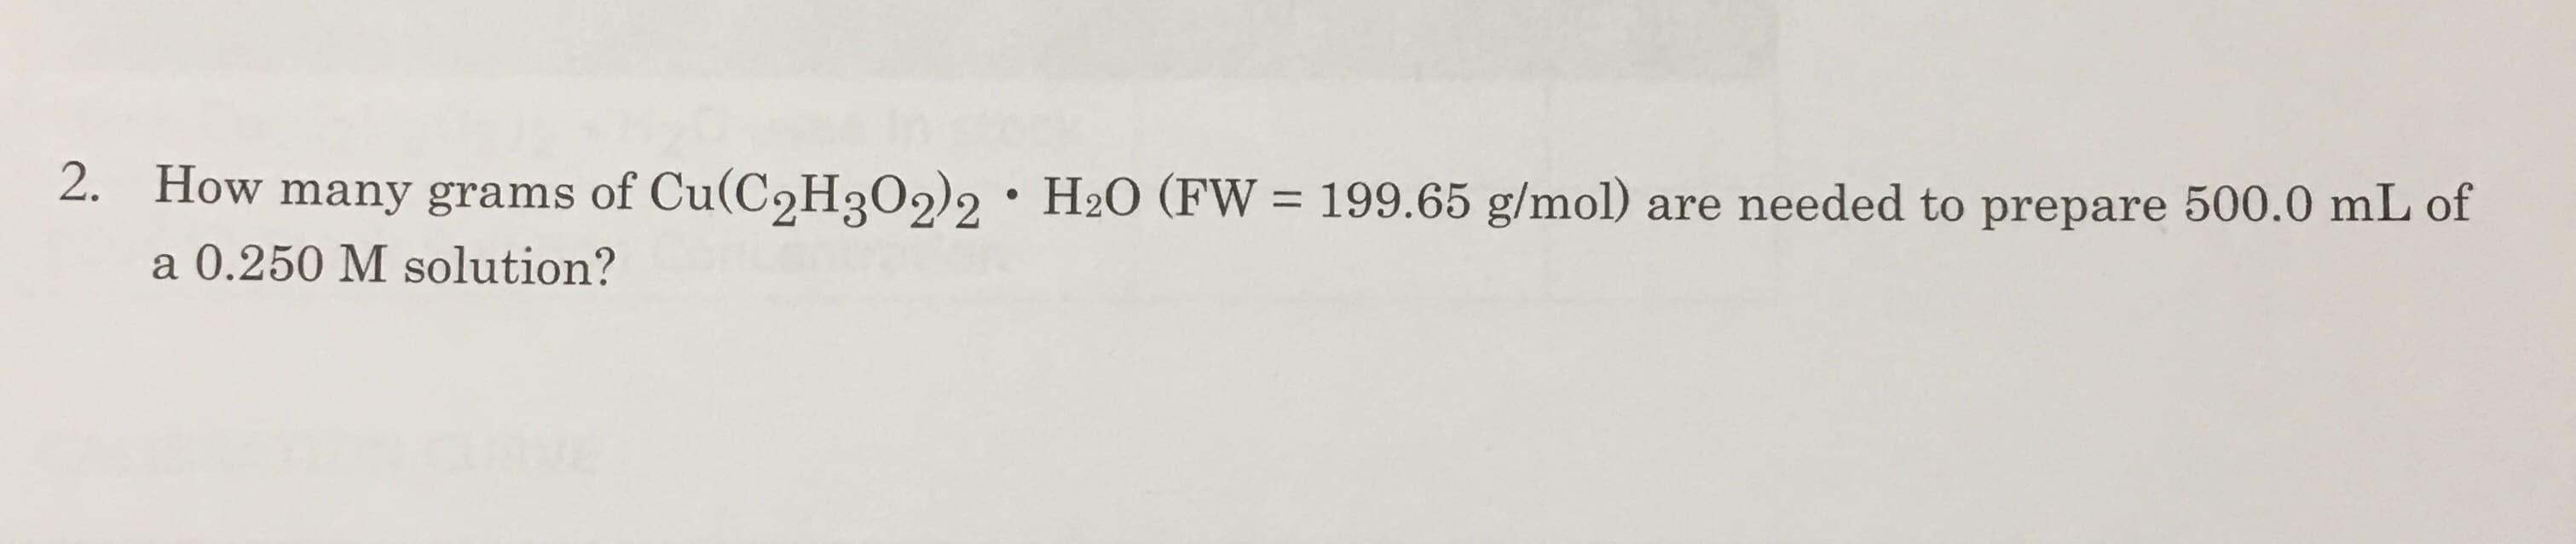 2.
How many grams of Cu(C2H302)2
H2O (FW
199.65 g/mol)
are needed to prepare 500.0 mL of
a 0.250 M solution?
